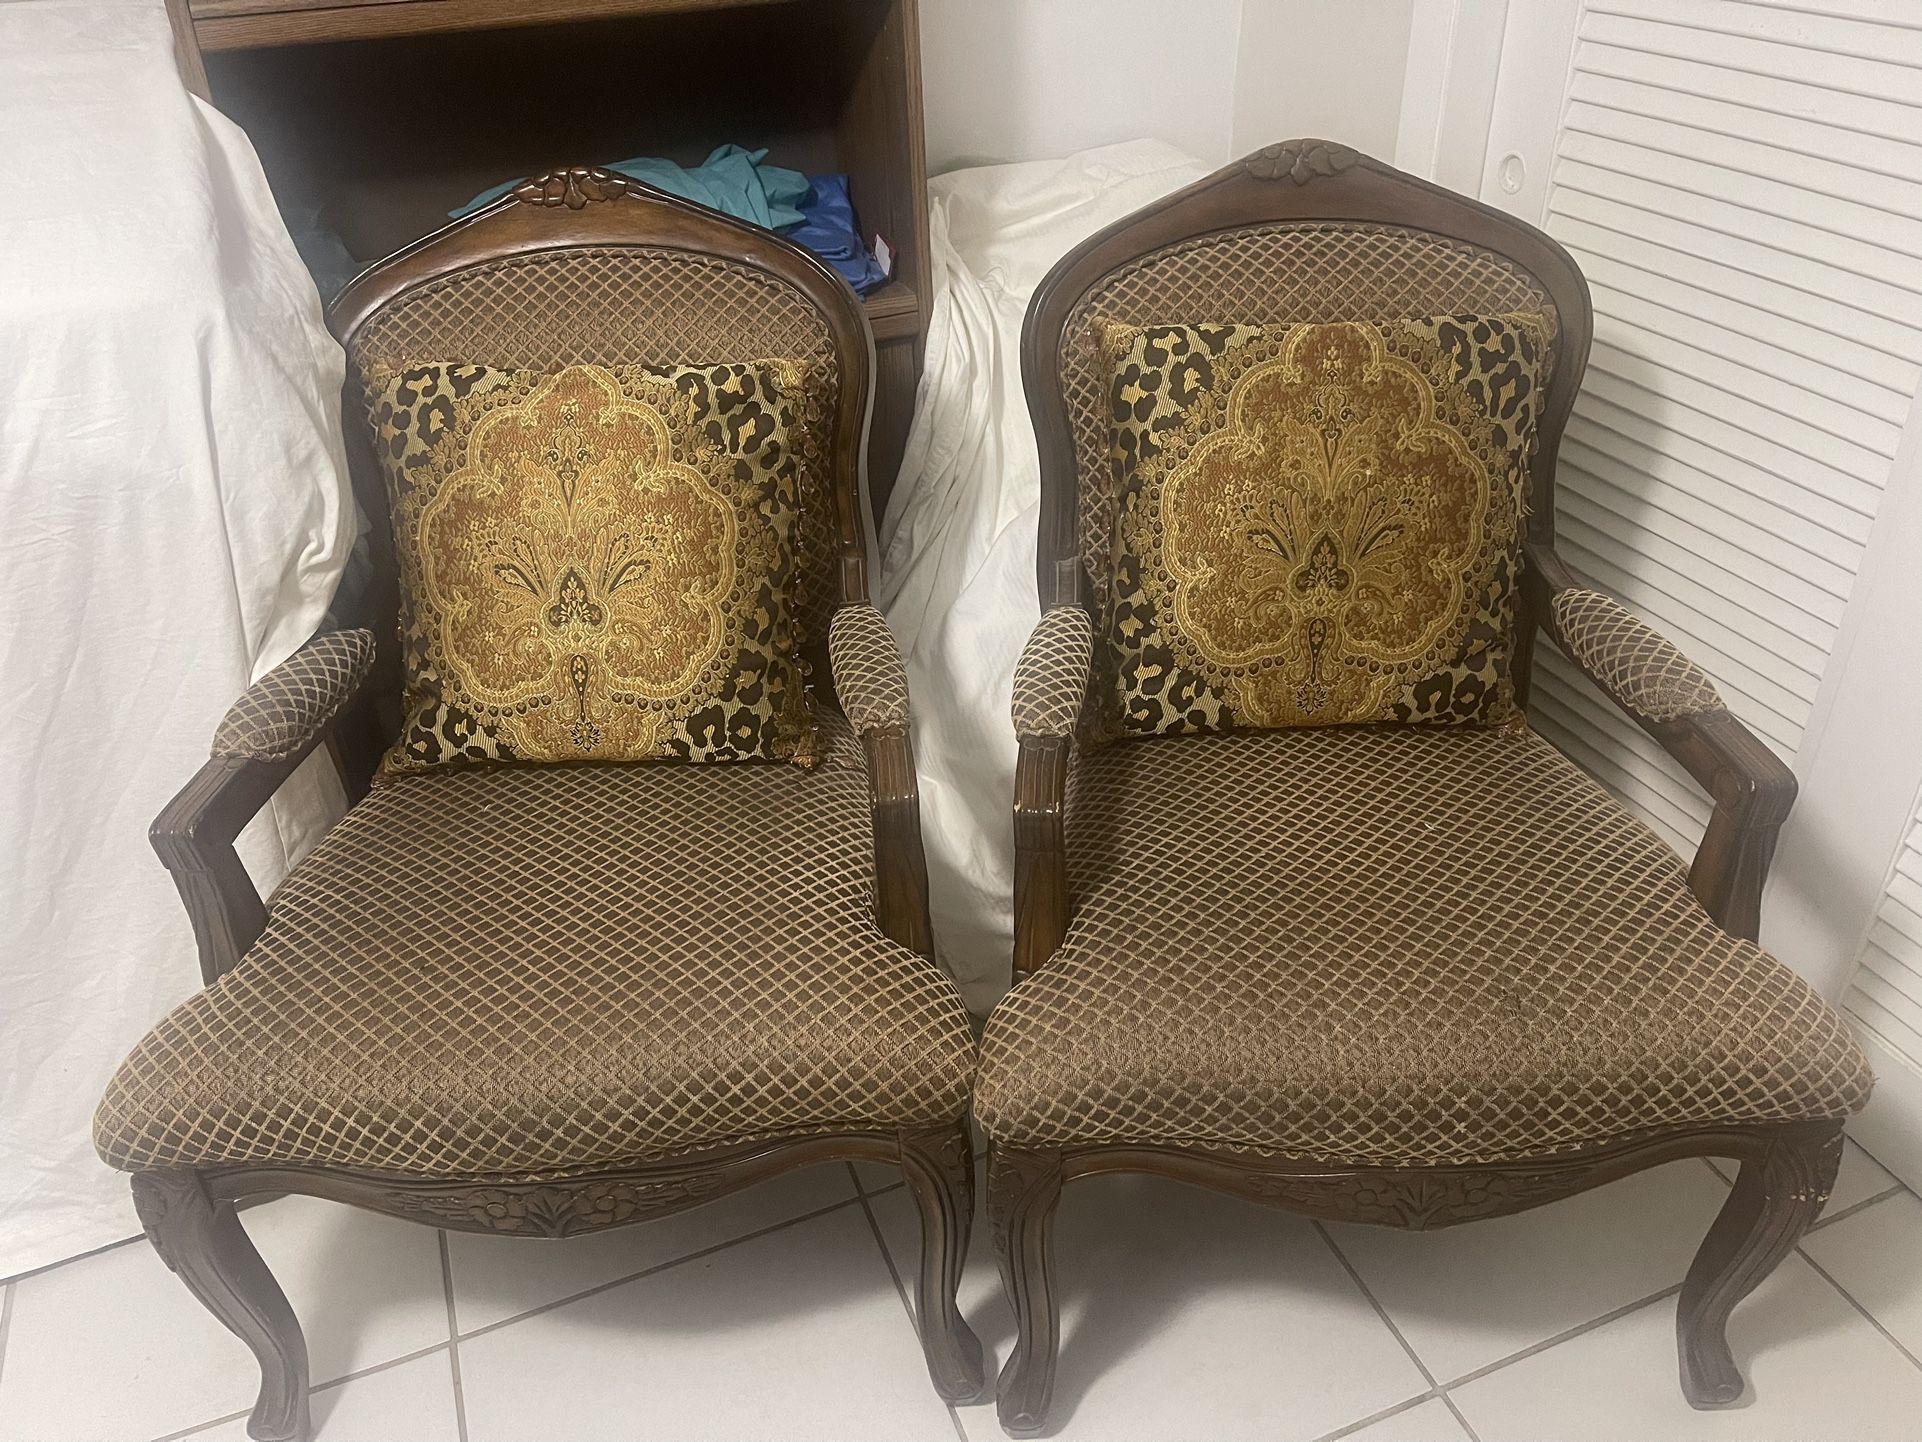 Accent Chairs, Each $75